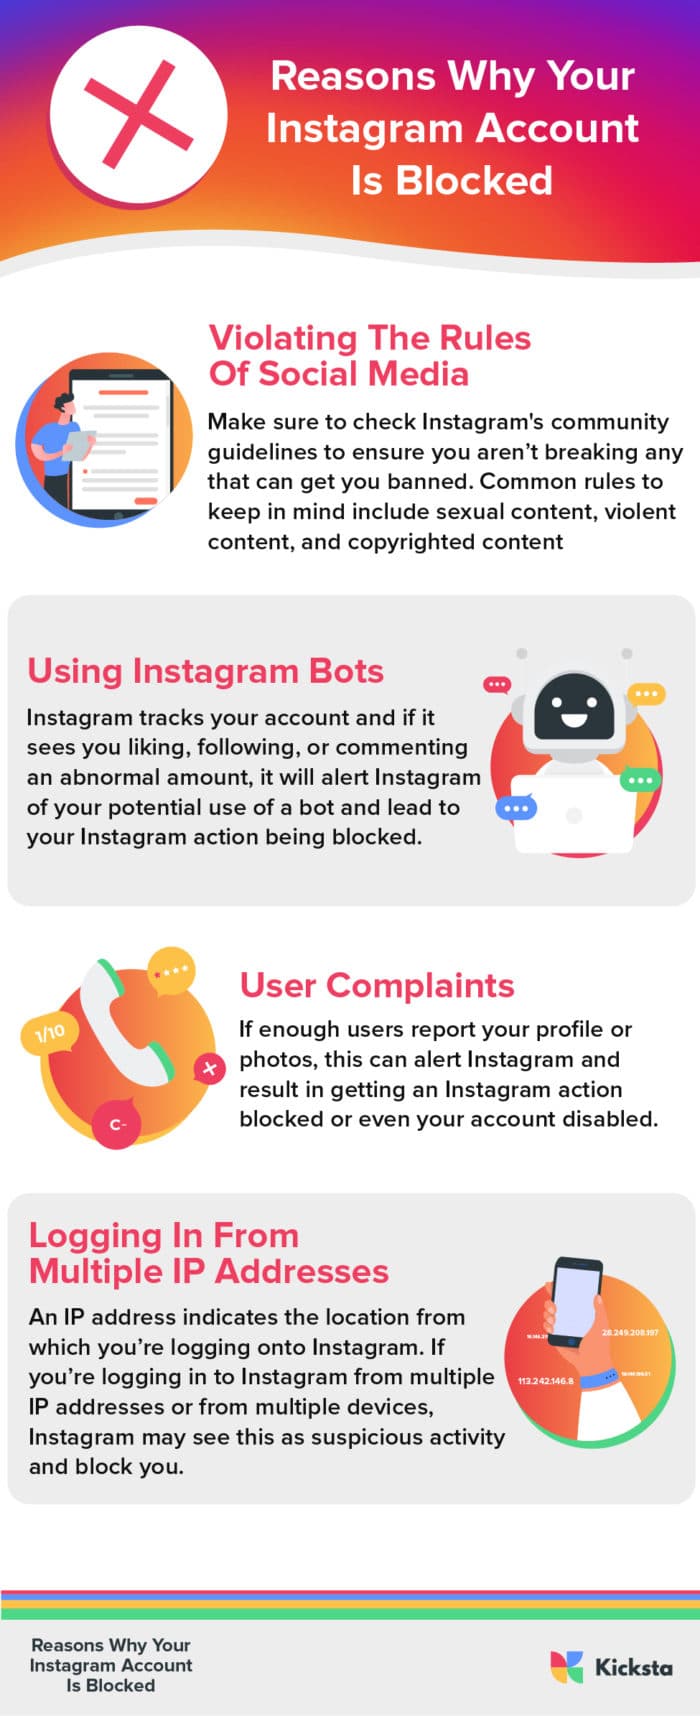 Reasons Why Your Instagram Account Is Blocked Infographic